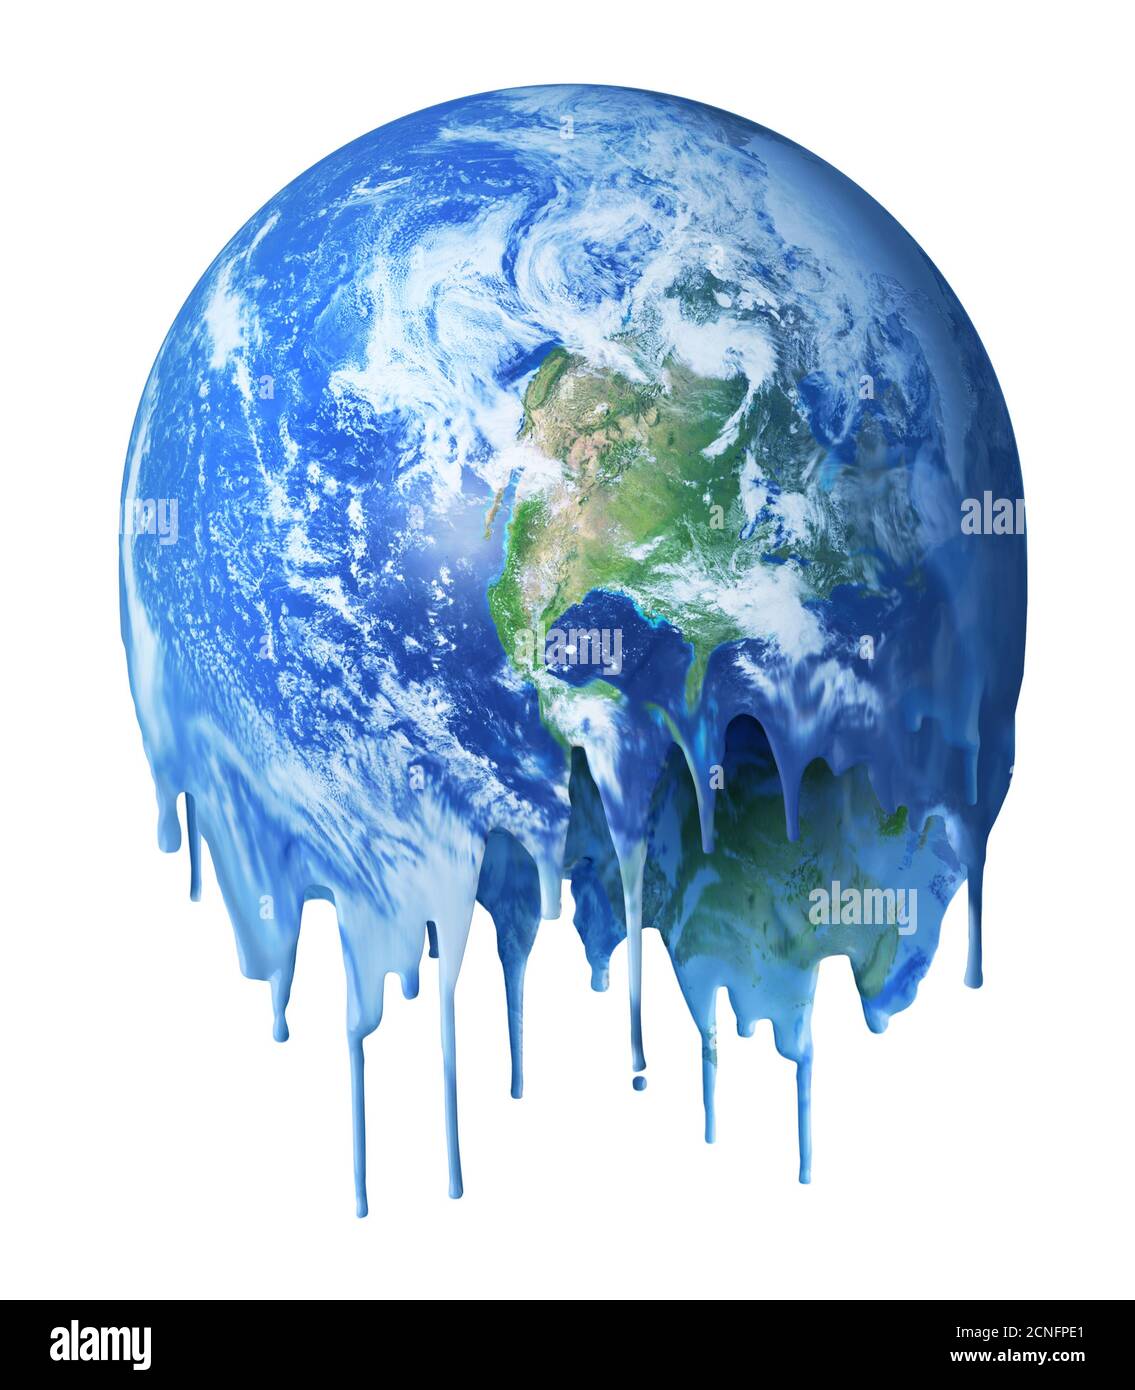 World globe with thermometer showing concept icon of global